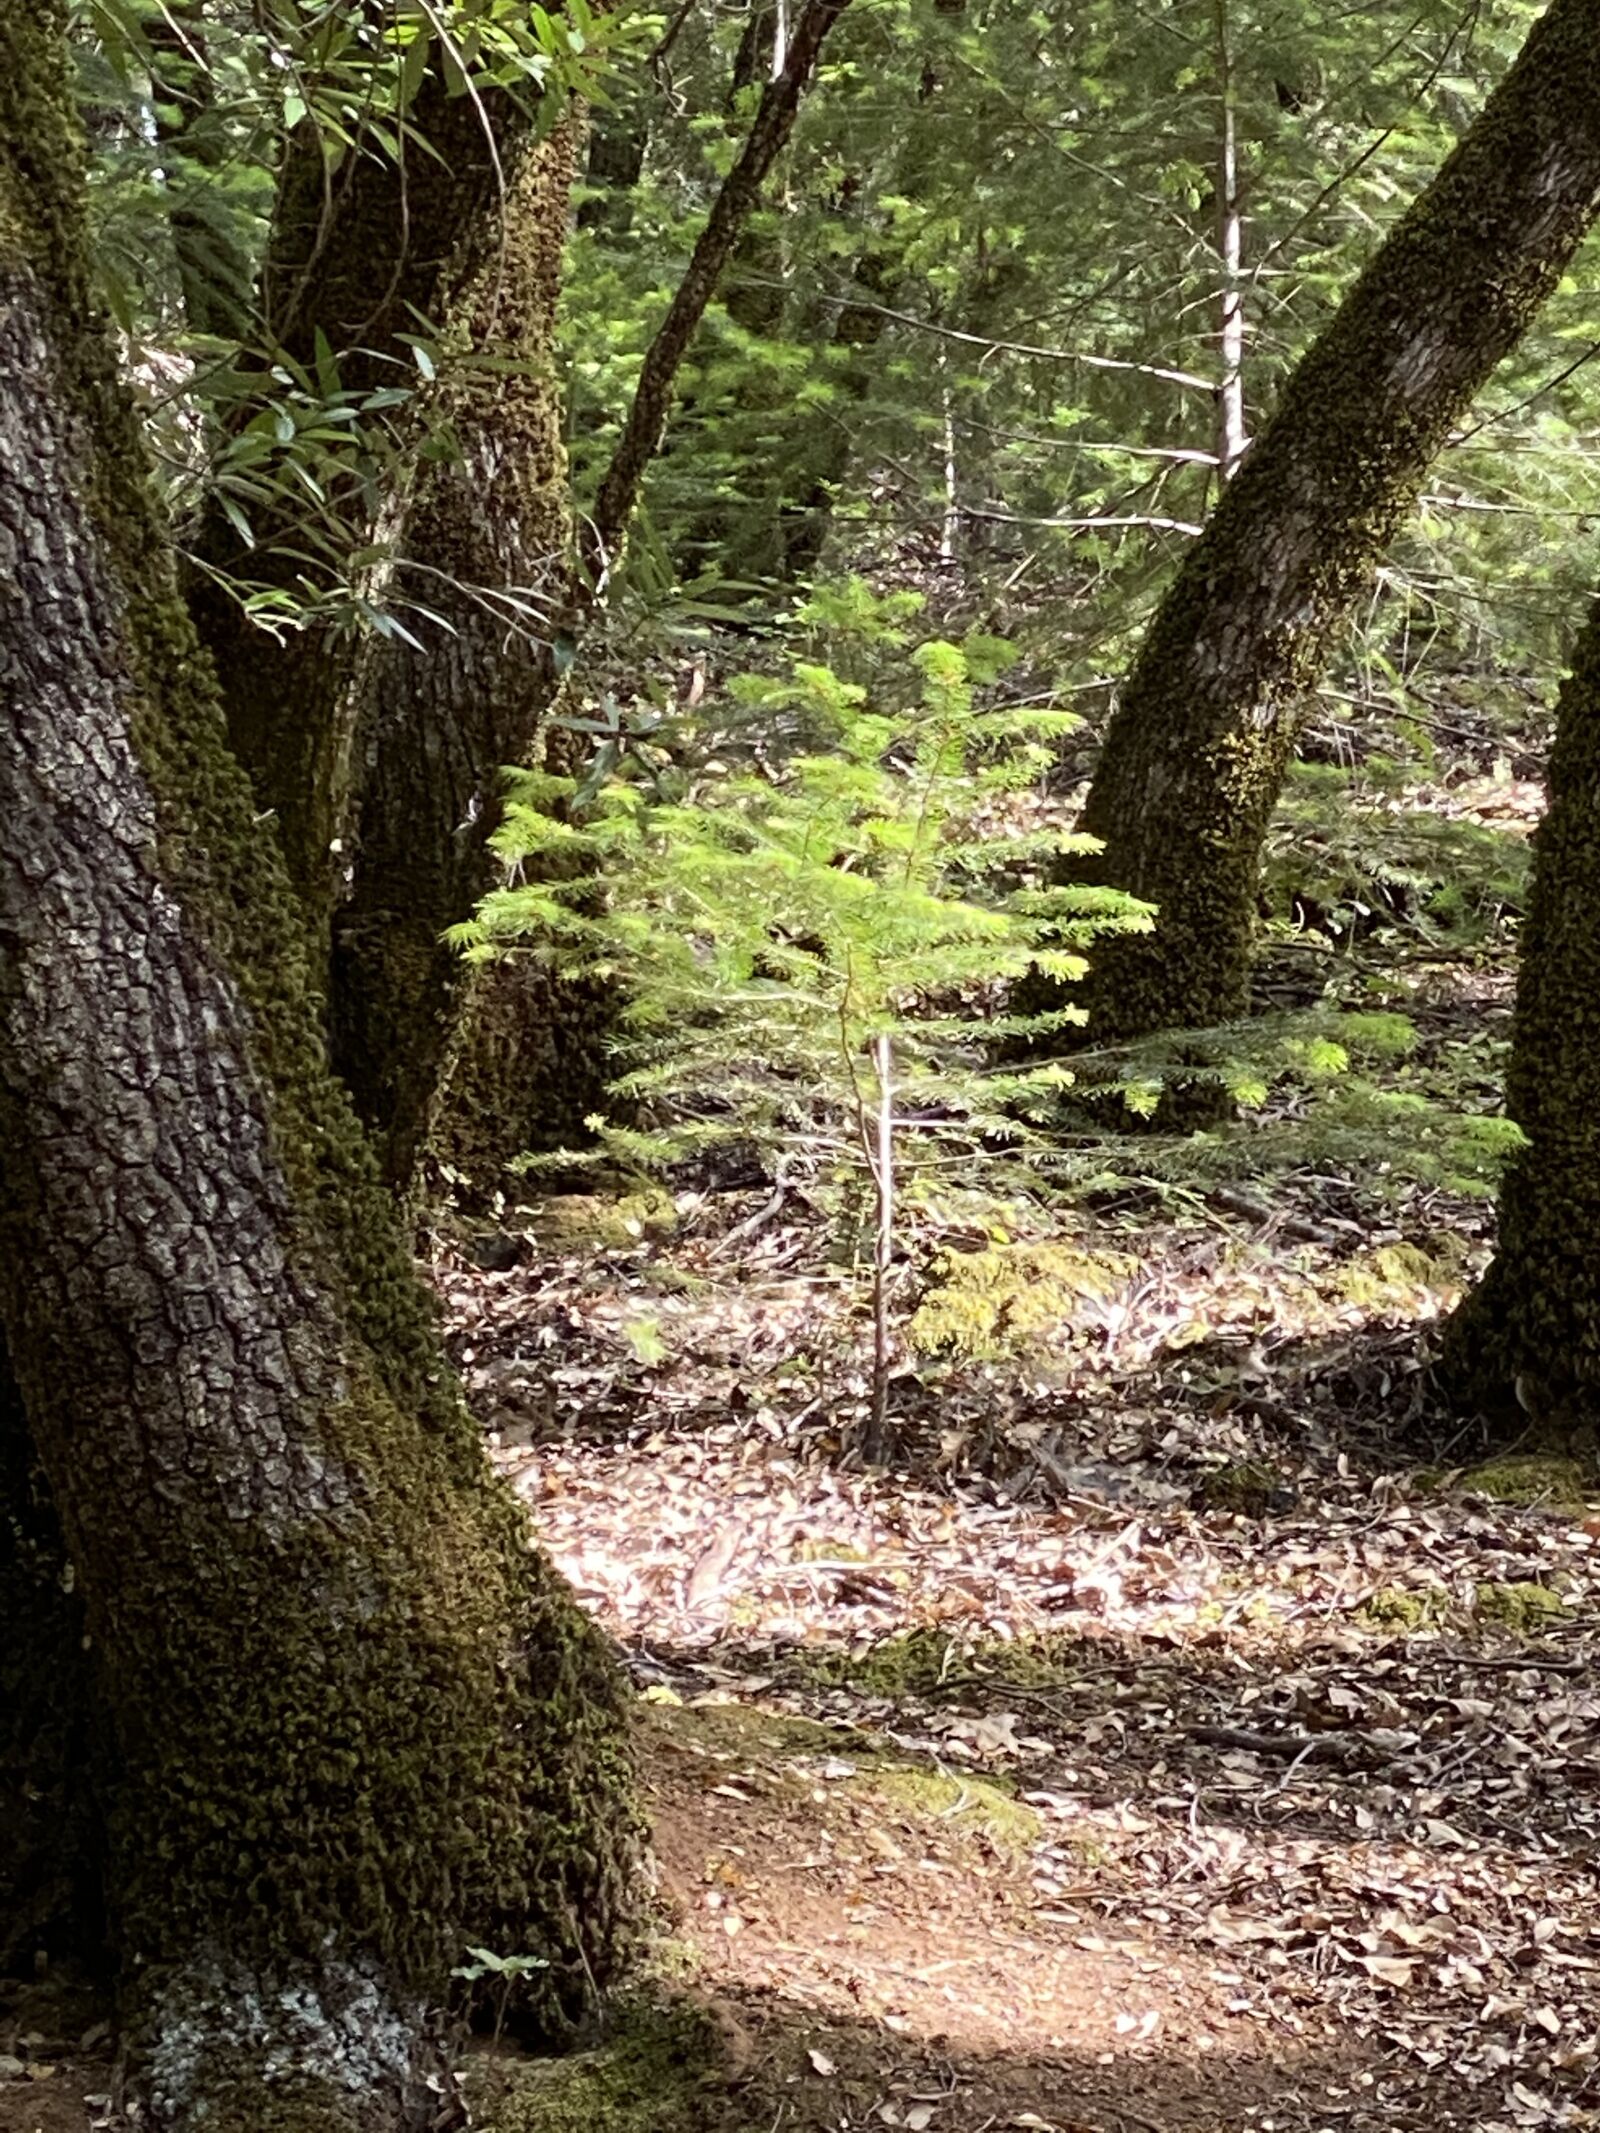 Apple iPhone 11 Pro Max + iPhone 11 Pro Max back triple camera 6mm f/2 sample photo. Forest, path, nature photography